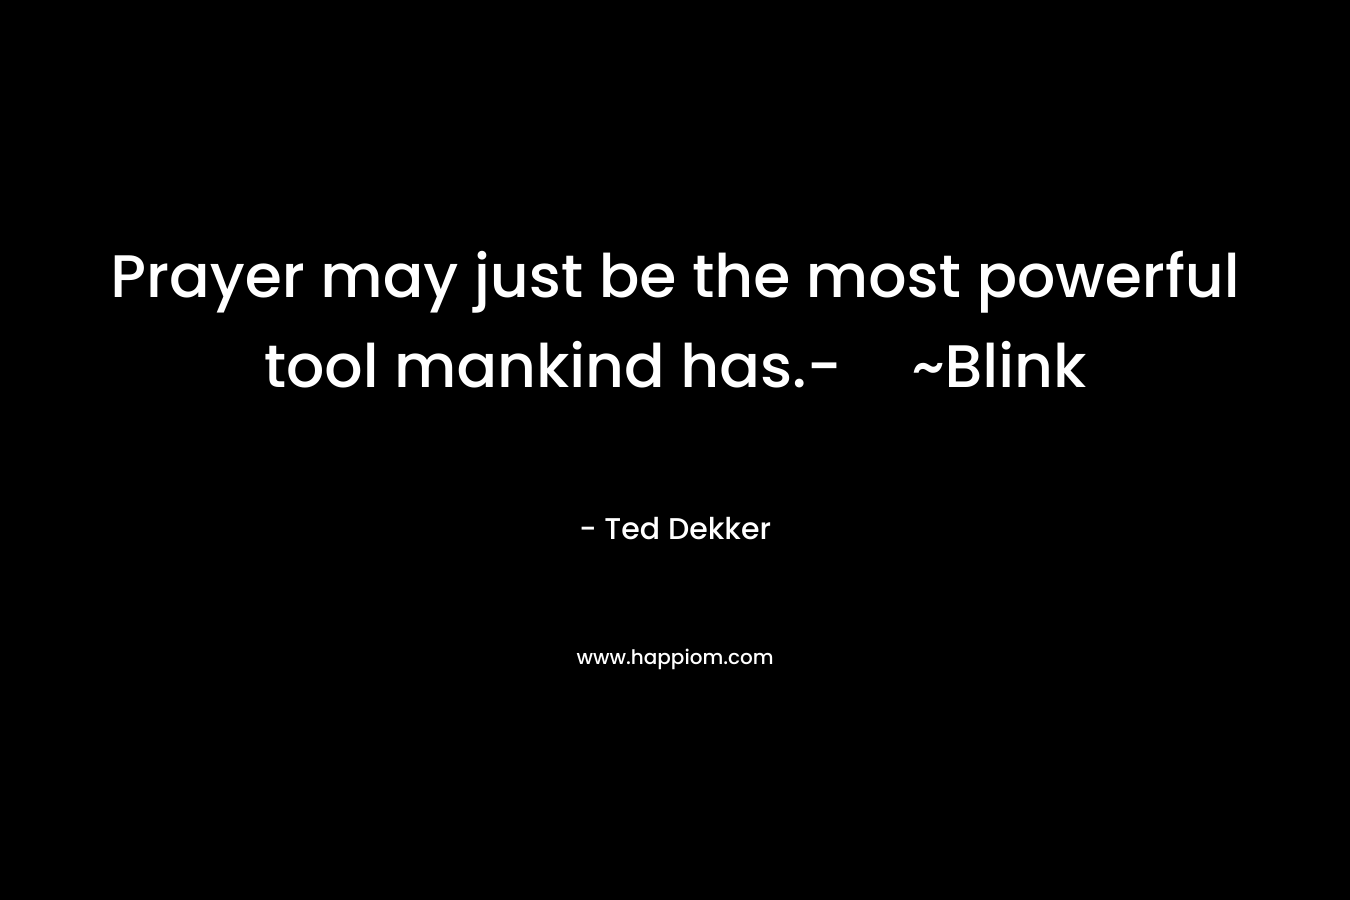 Prayer may just be the most powerful tool mankind has.-~Blink – Ted Dekker